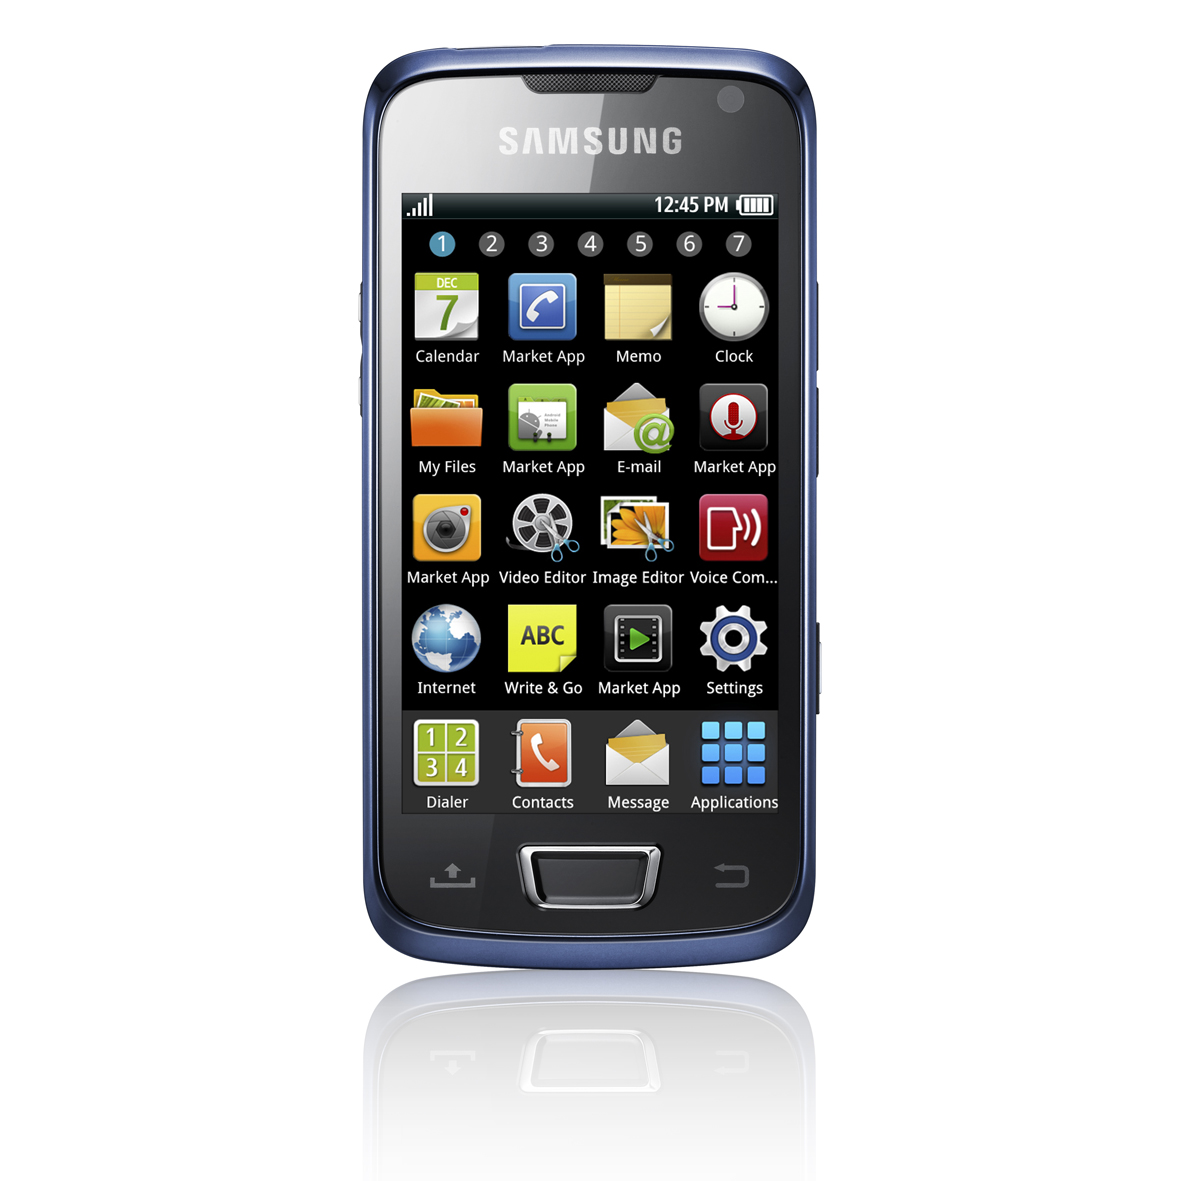 Samsung i8520 Galaxy Beam builtin projector Android smartphone available July 17  Android 